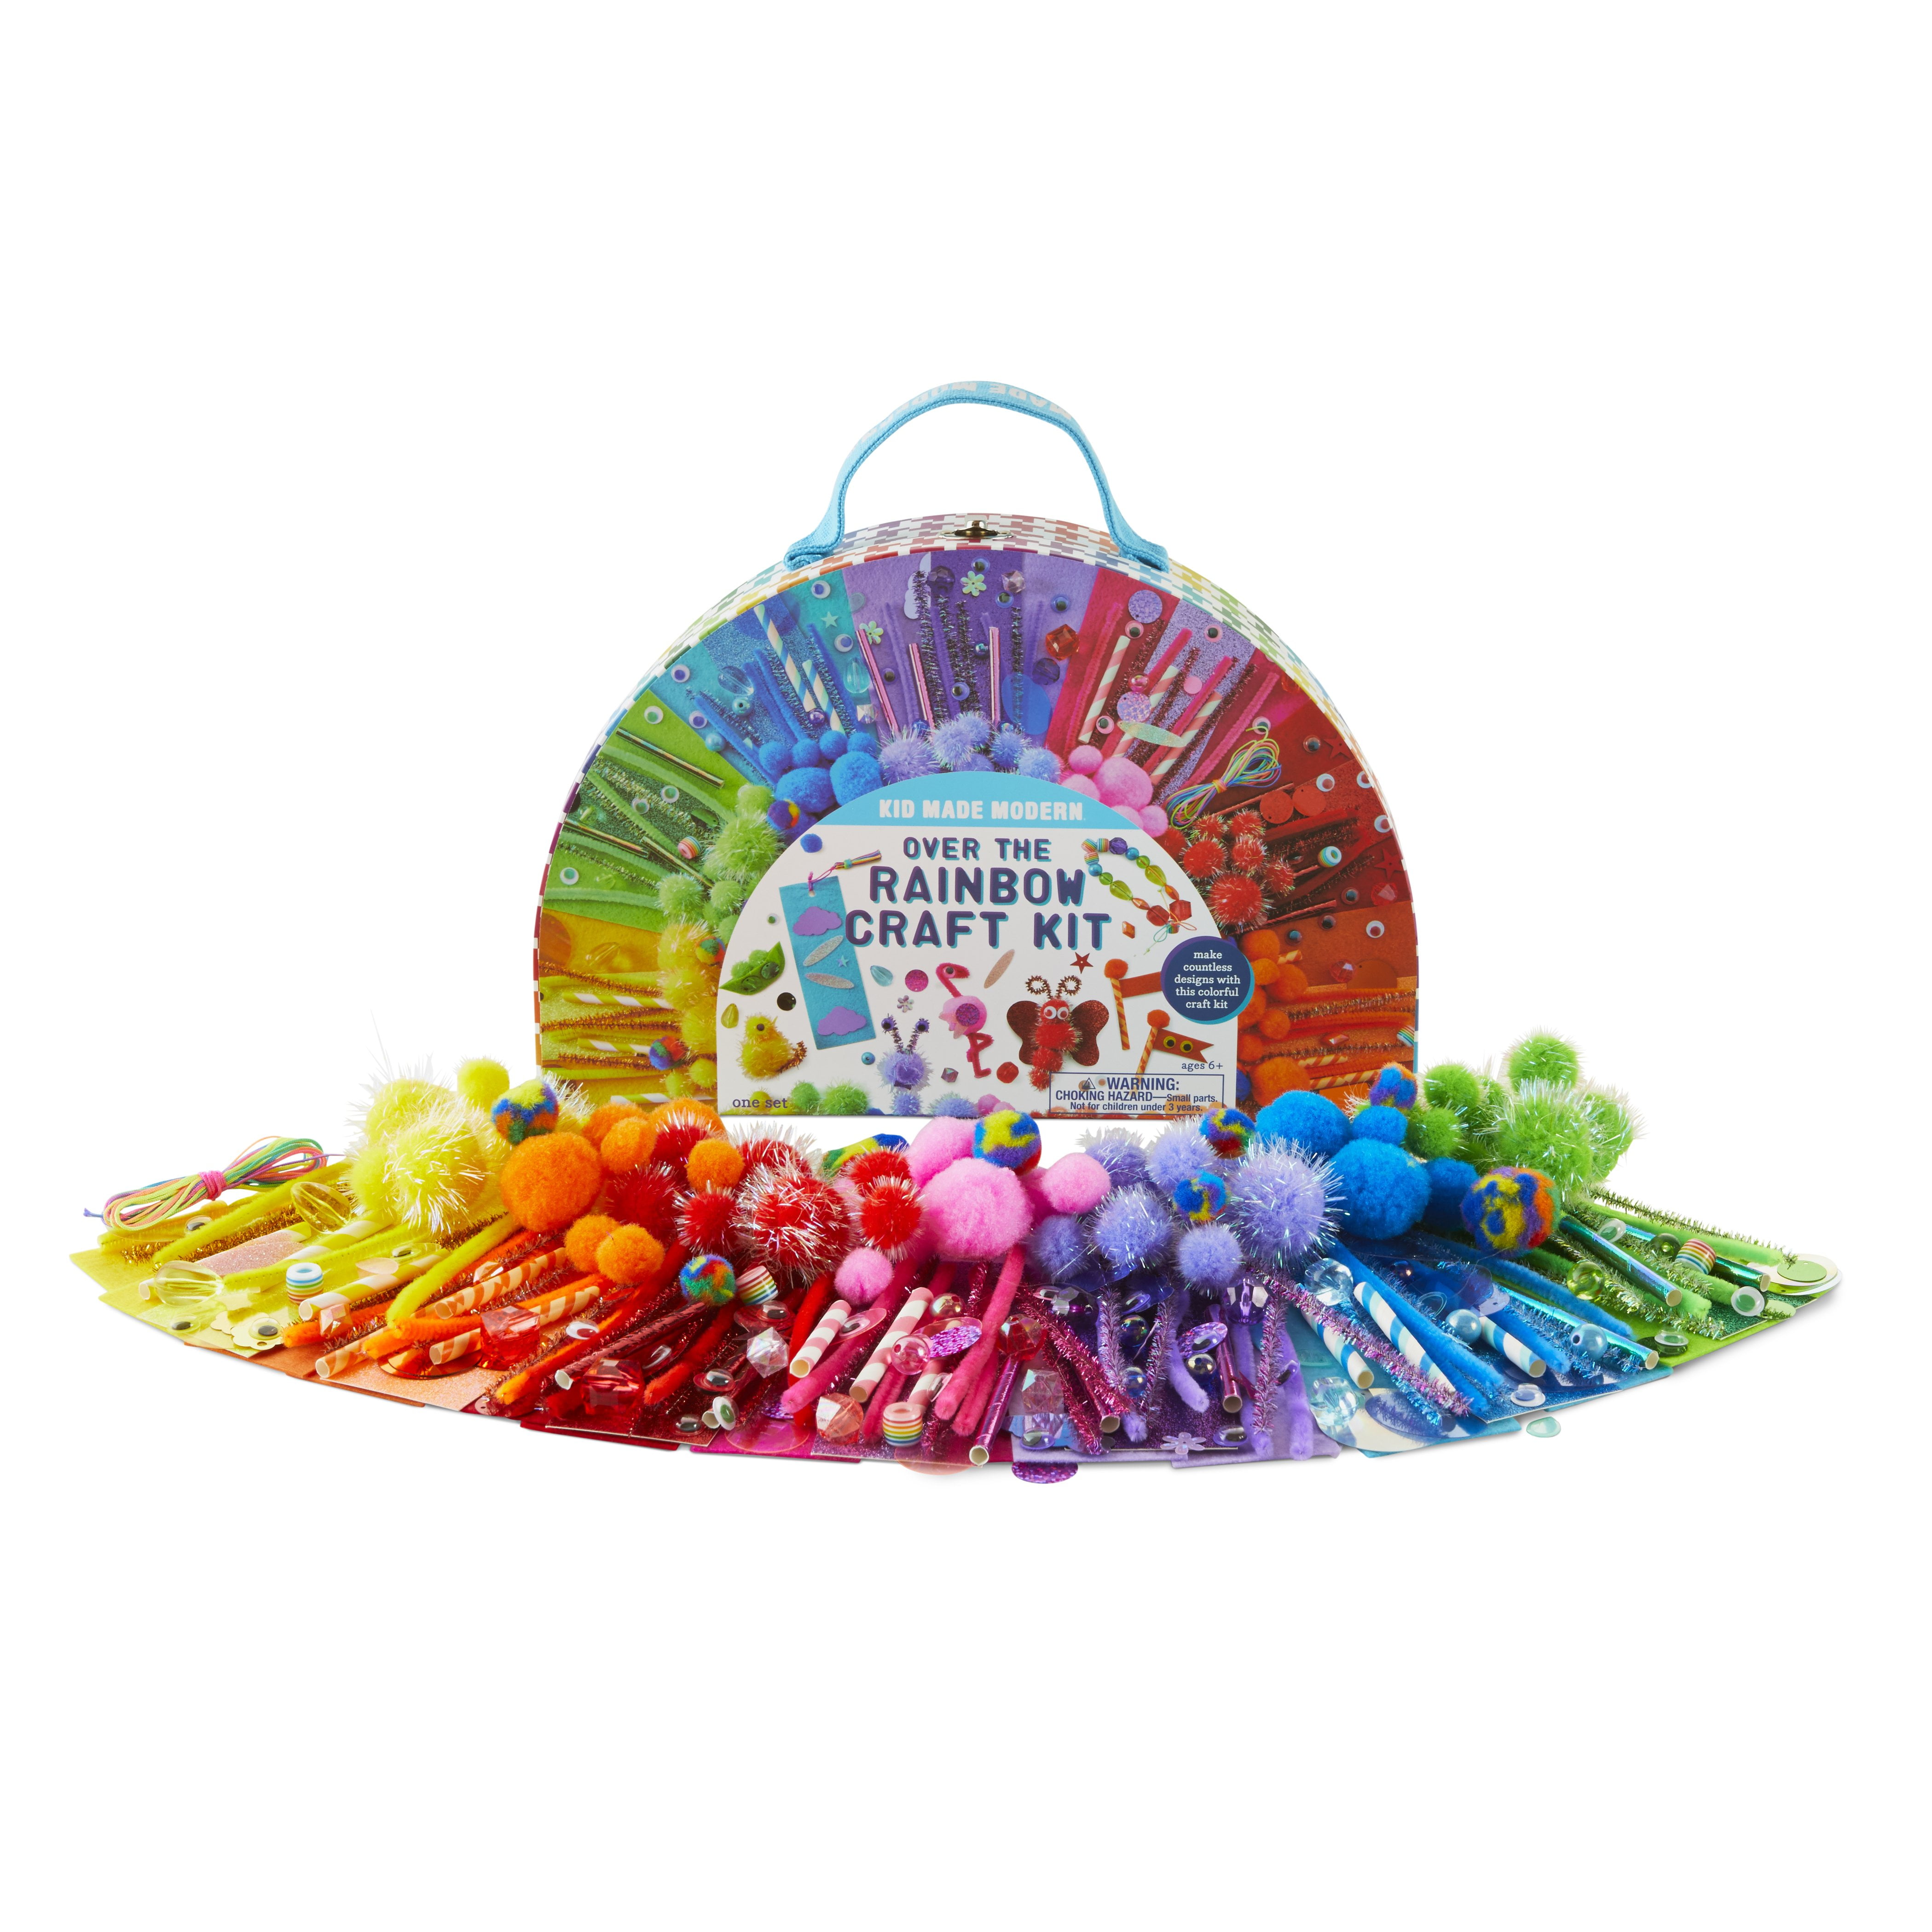 Creativity for Kids Pom Pom Pictures Transportation - Sensory Craft Kit for  Boys and Girls Ages 3+ 